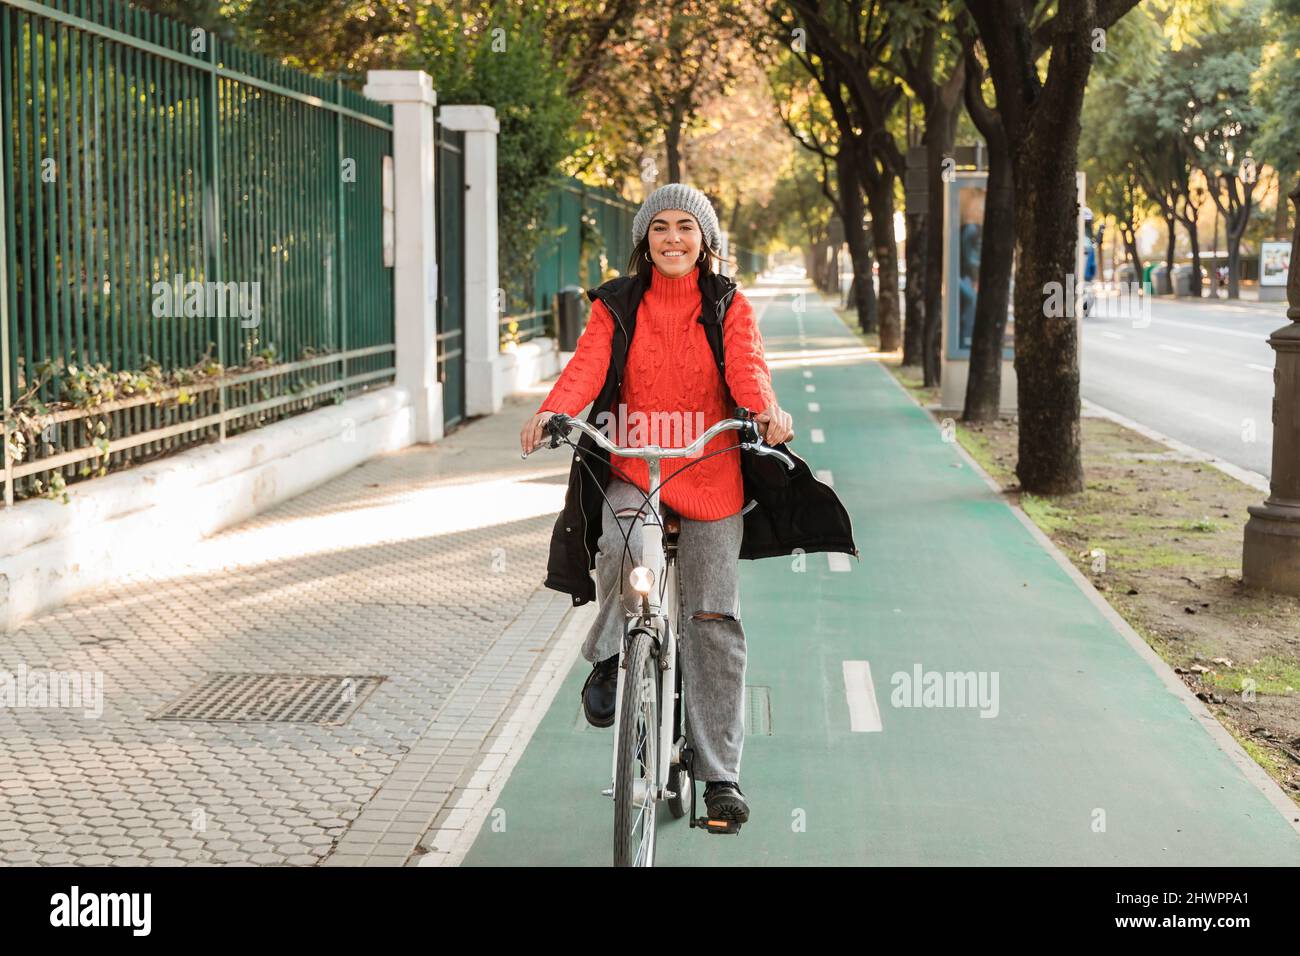 Smiling young woman cycling on bicycle lane Stock Photo